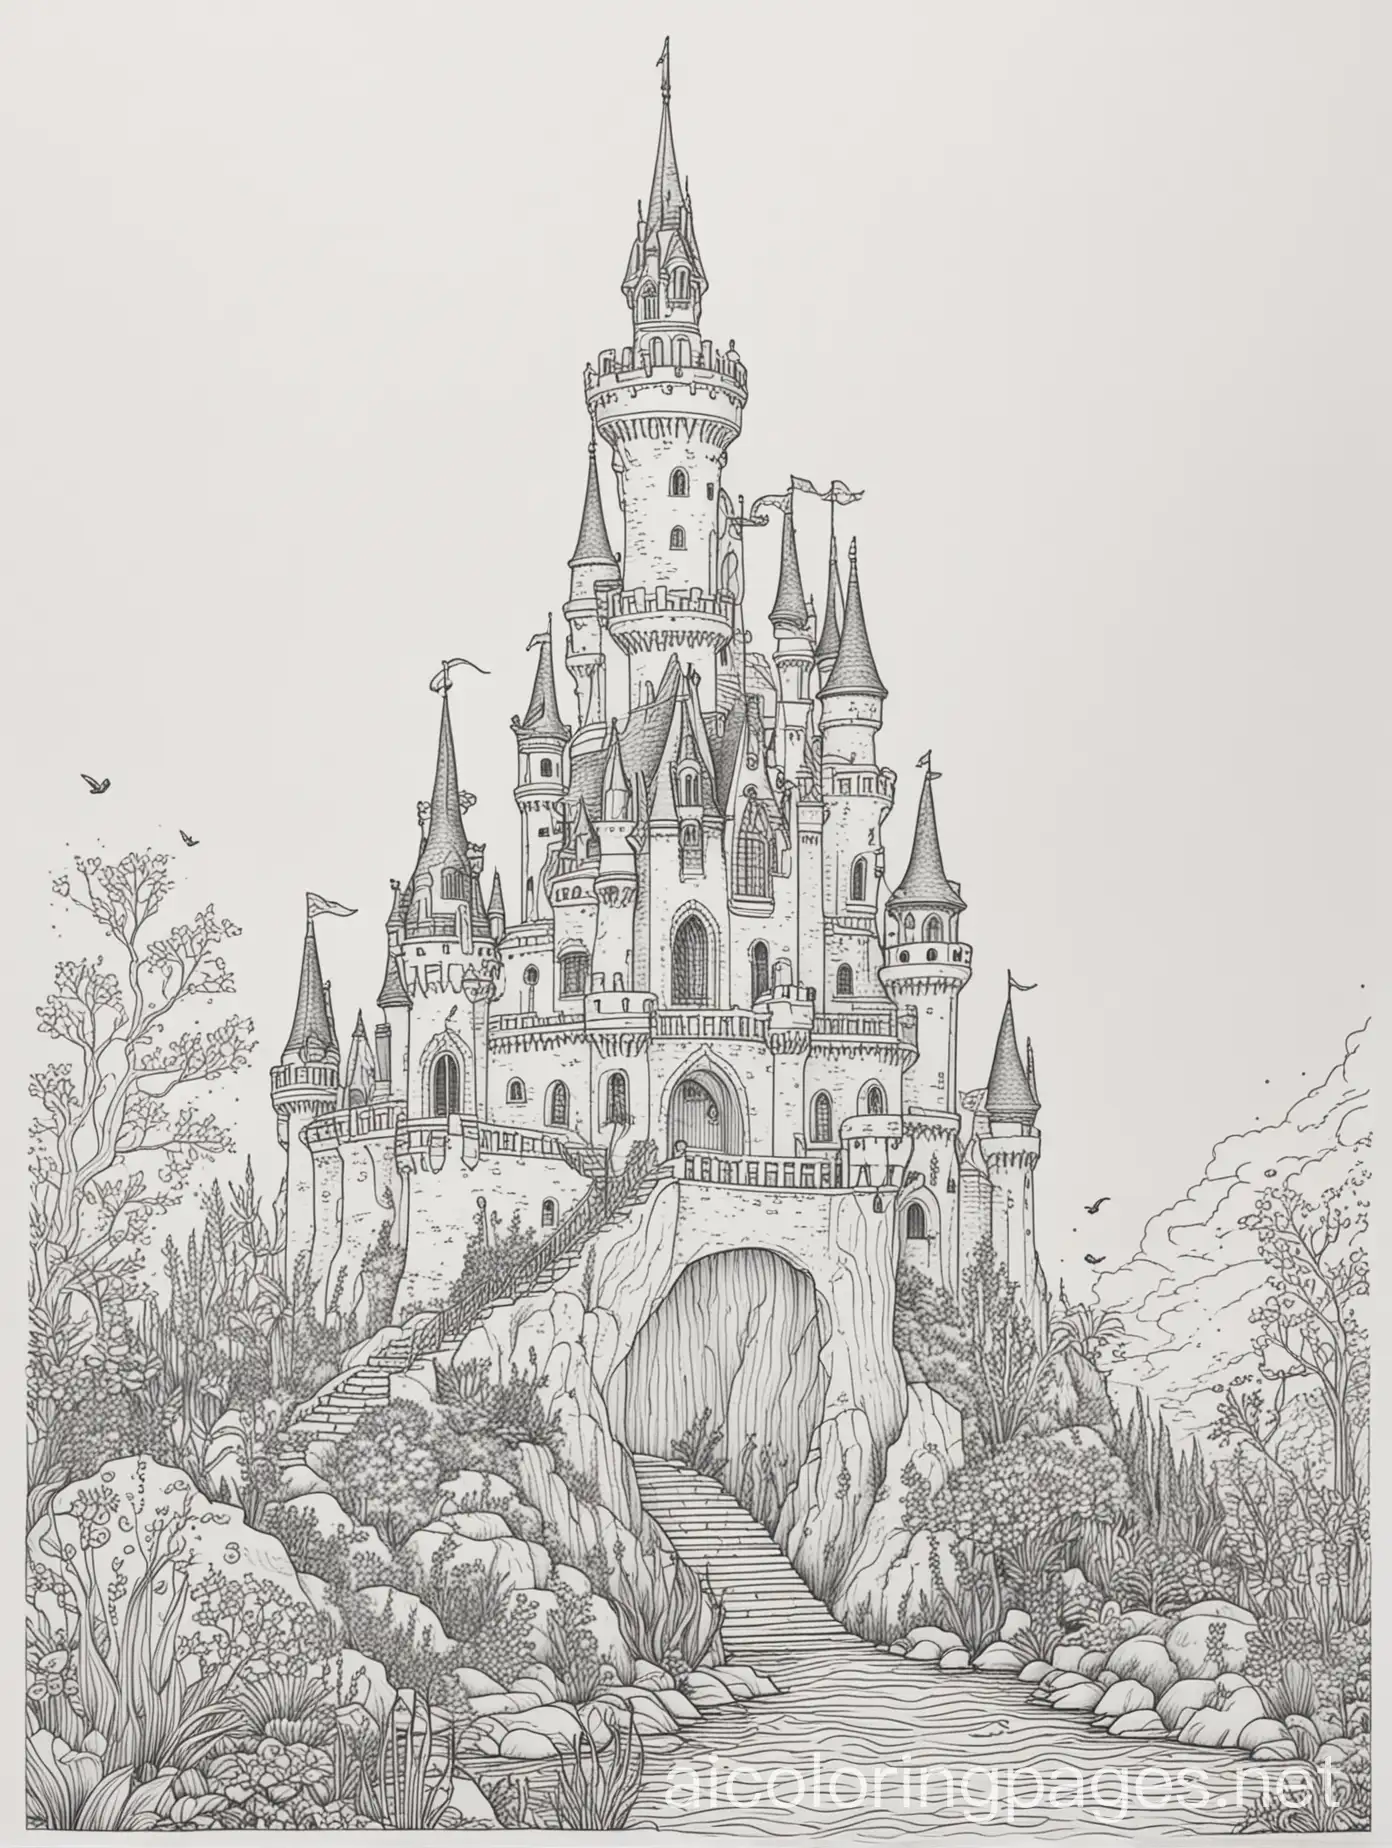 Ariel mermaid castle, Coloring Page, black and white, line art, white background, Simplicity, Ample White Space. The background of the coloring page is plain white to make it easy for young children to color within the lines. The outlines of all the subjects are easy to distinguish, making it simple for kids to color without too much difficulty